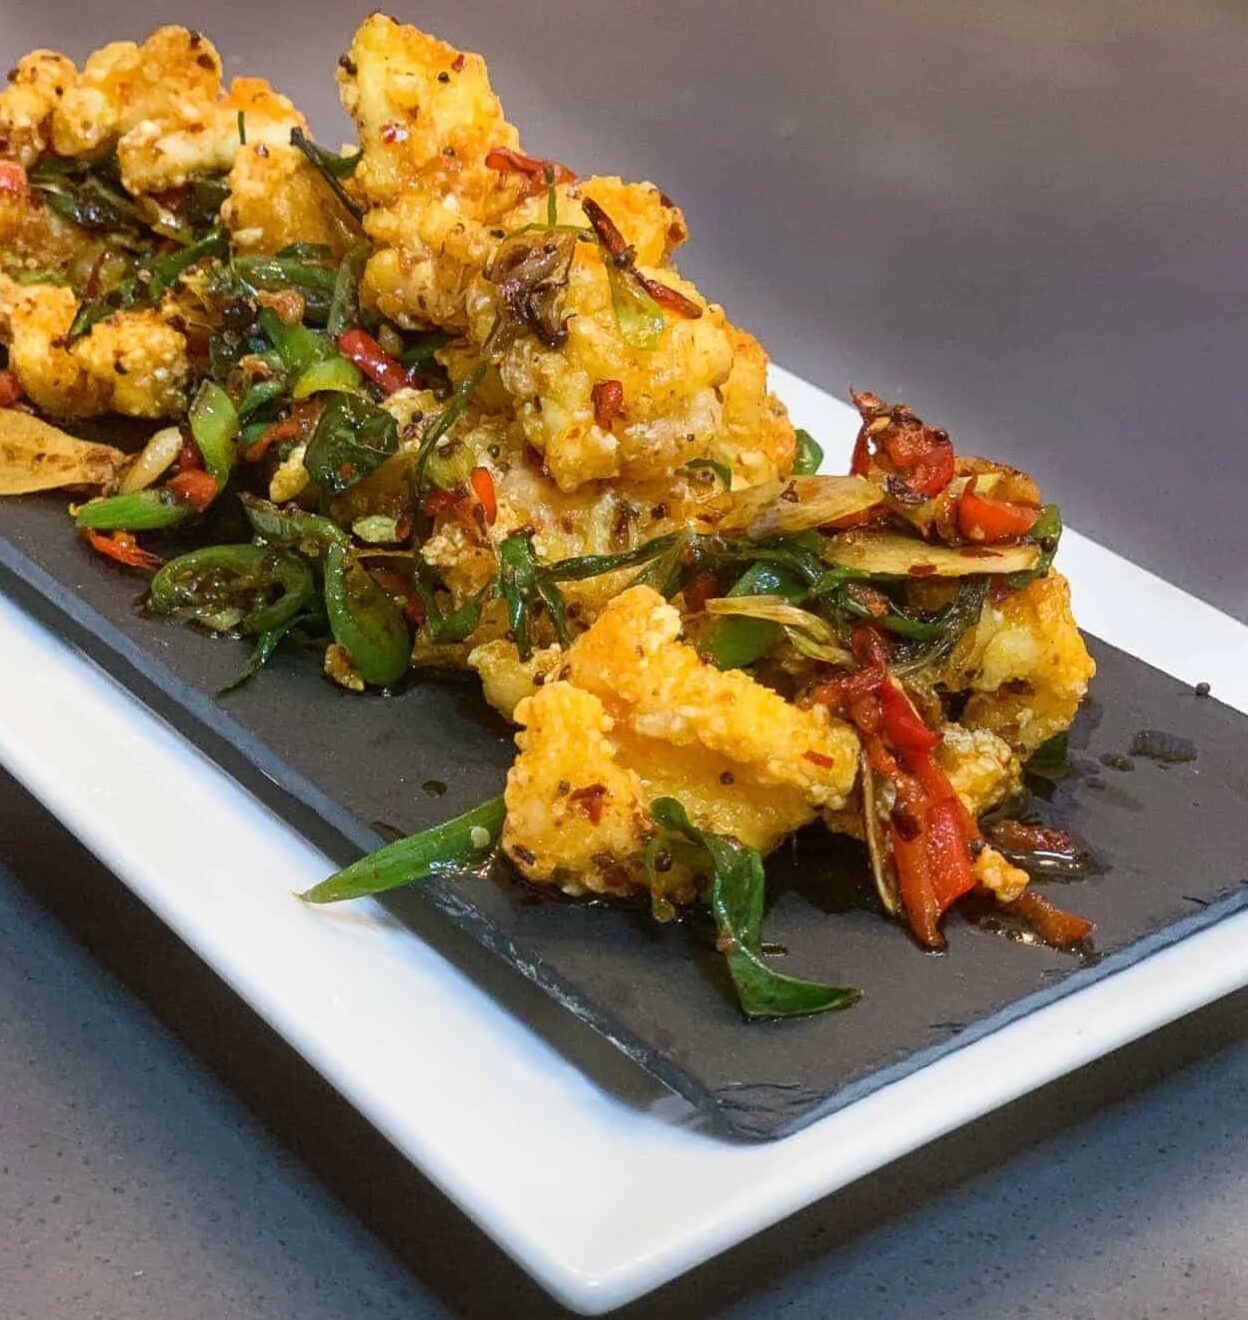 Try Our Hot Butter Cuttlefish Recipe!